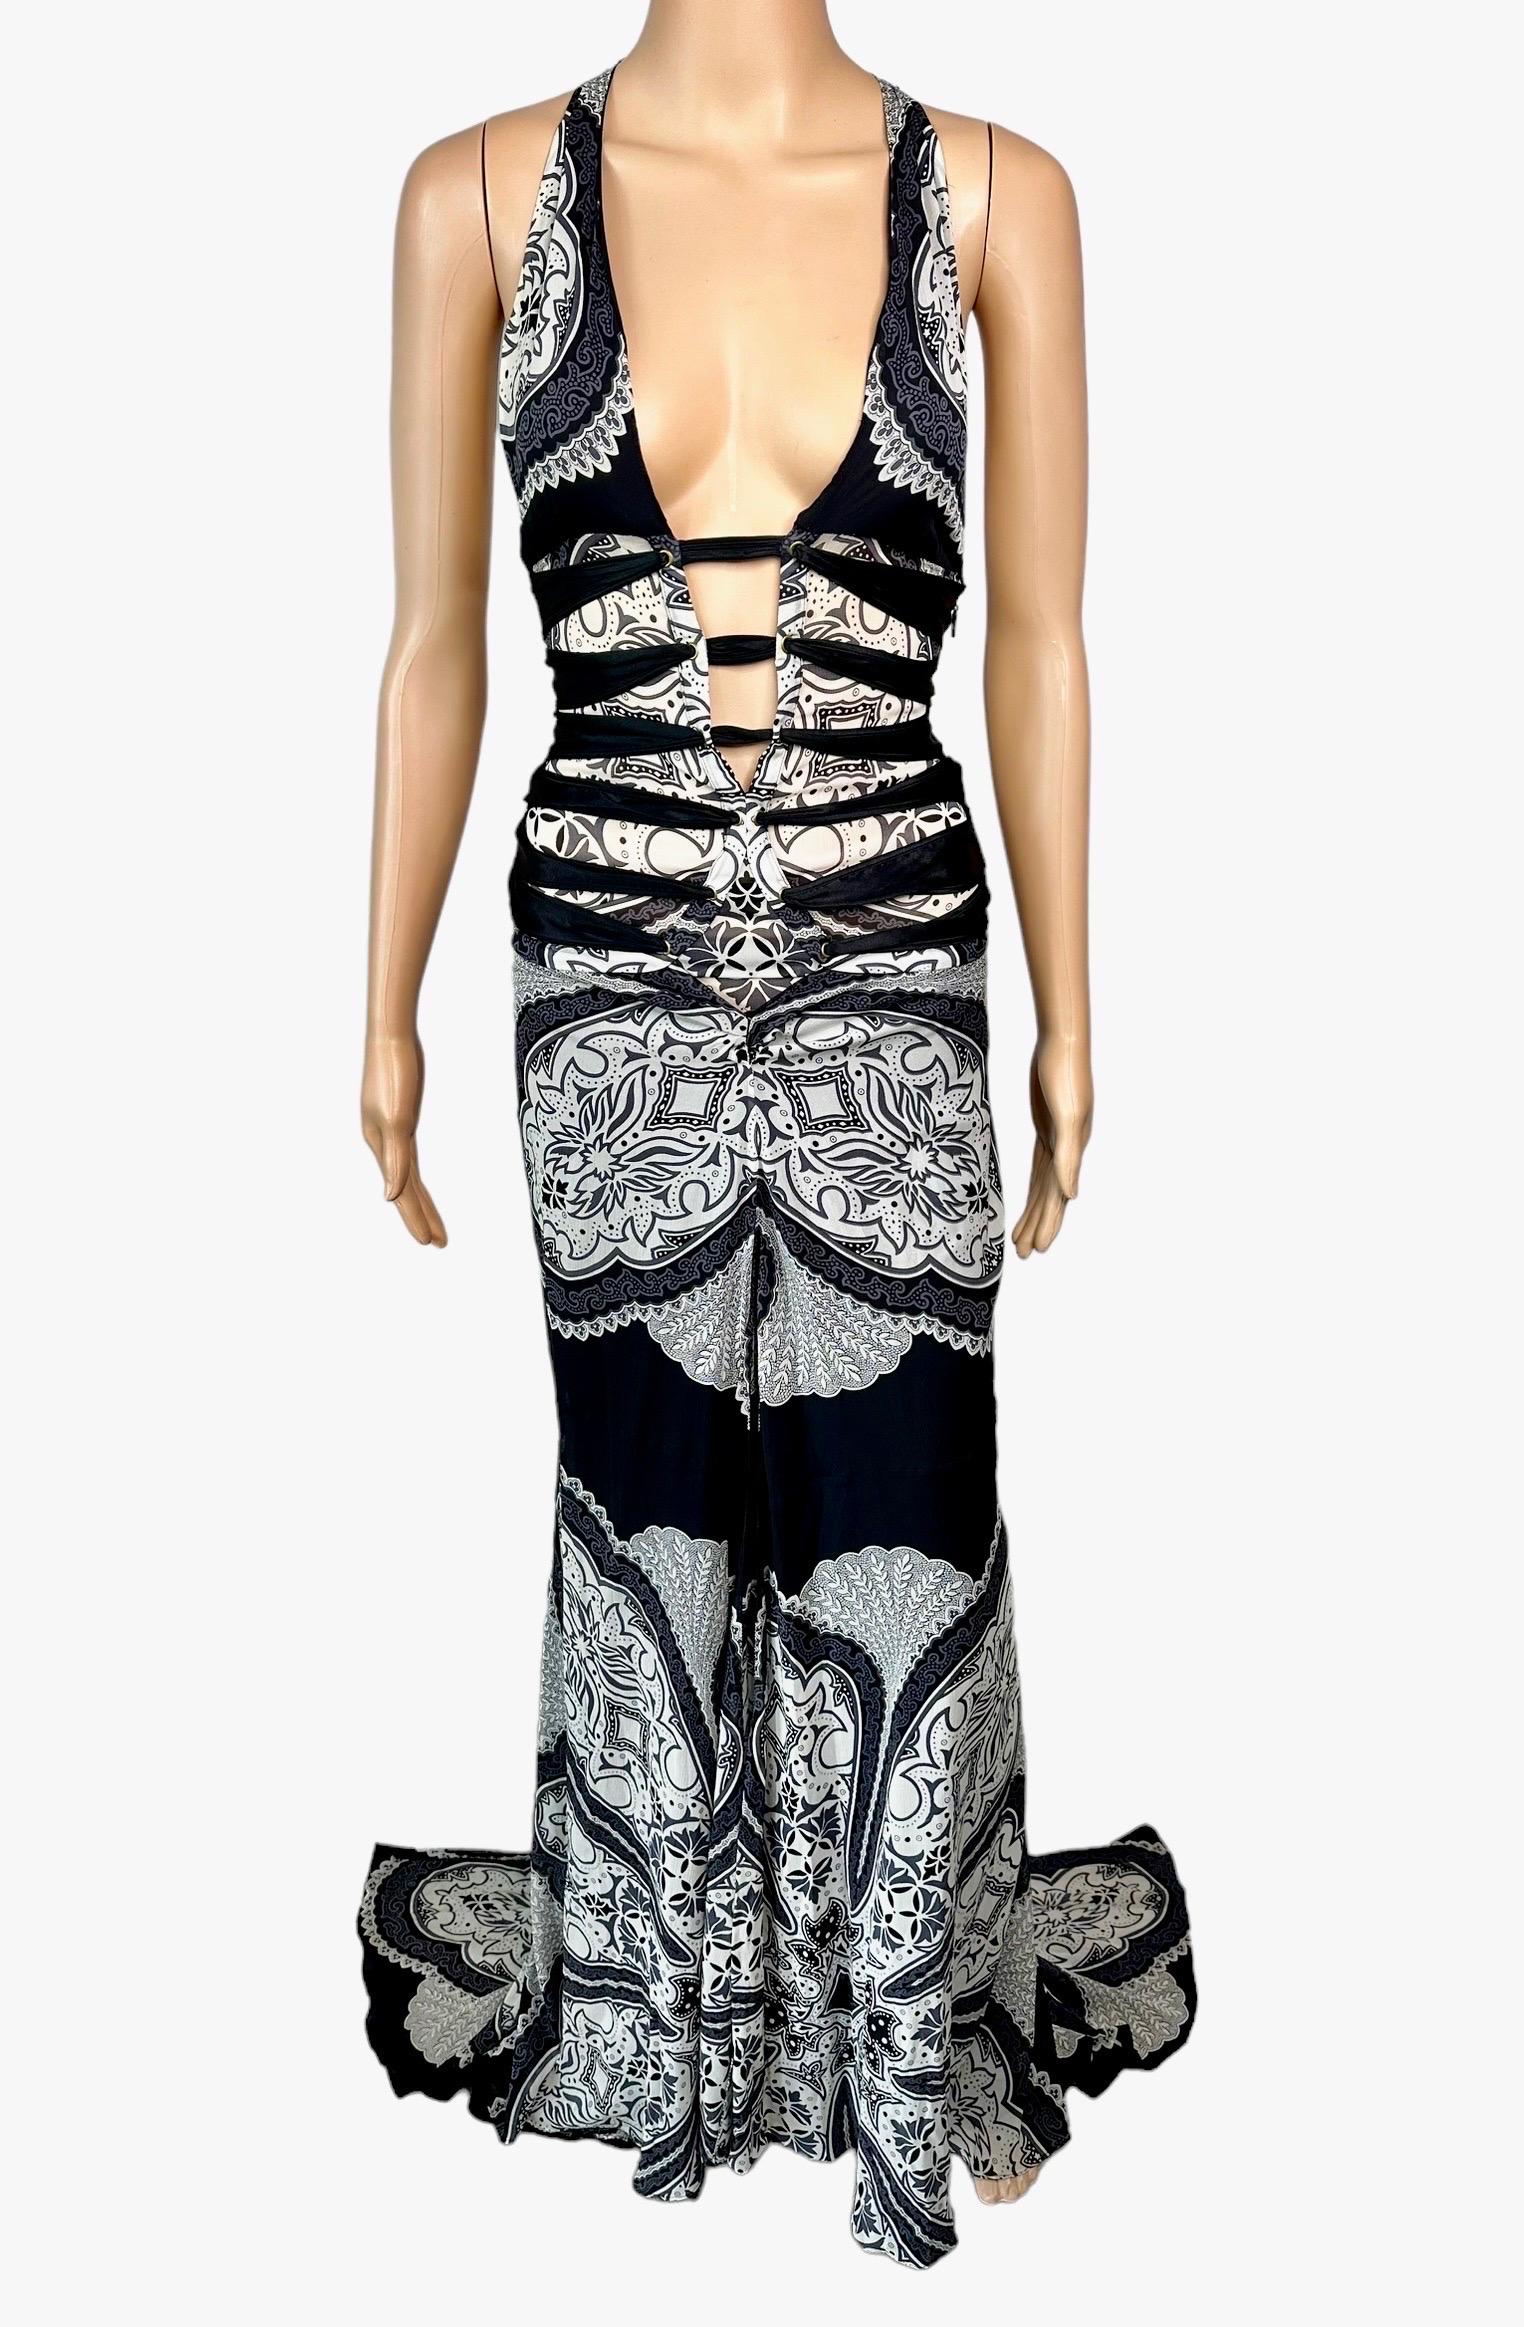 Tom Ford for Gucci Cruise 2004 Plunging Cutout Strappy Silk Evening Dress Gown In Good Condition In Naples, FL